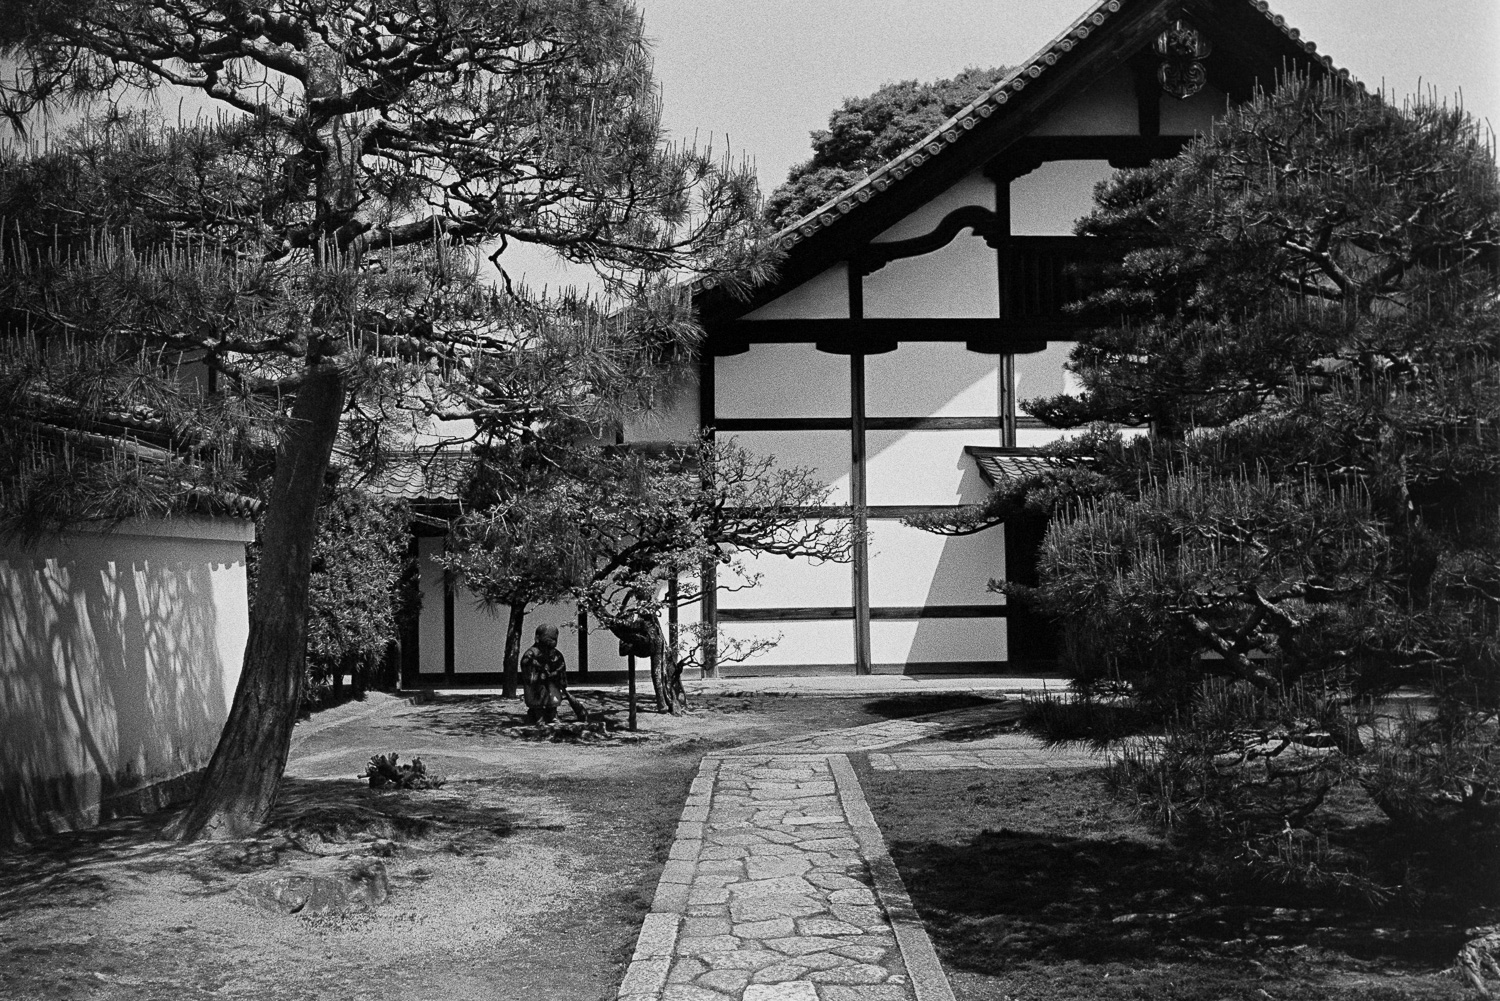  Traditional Japanese architecture. 